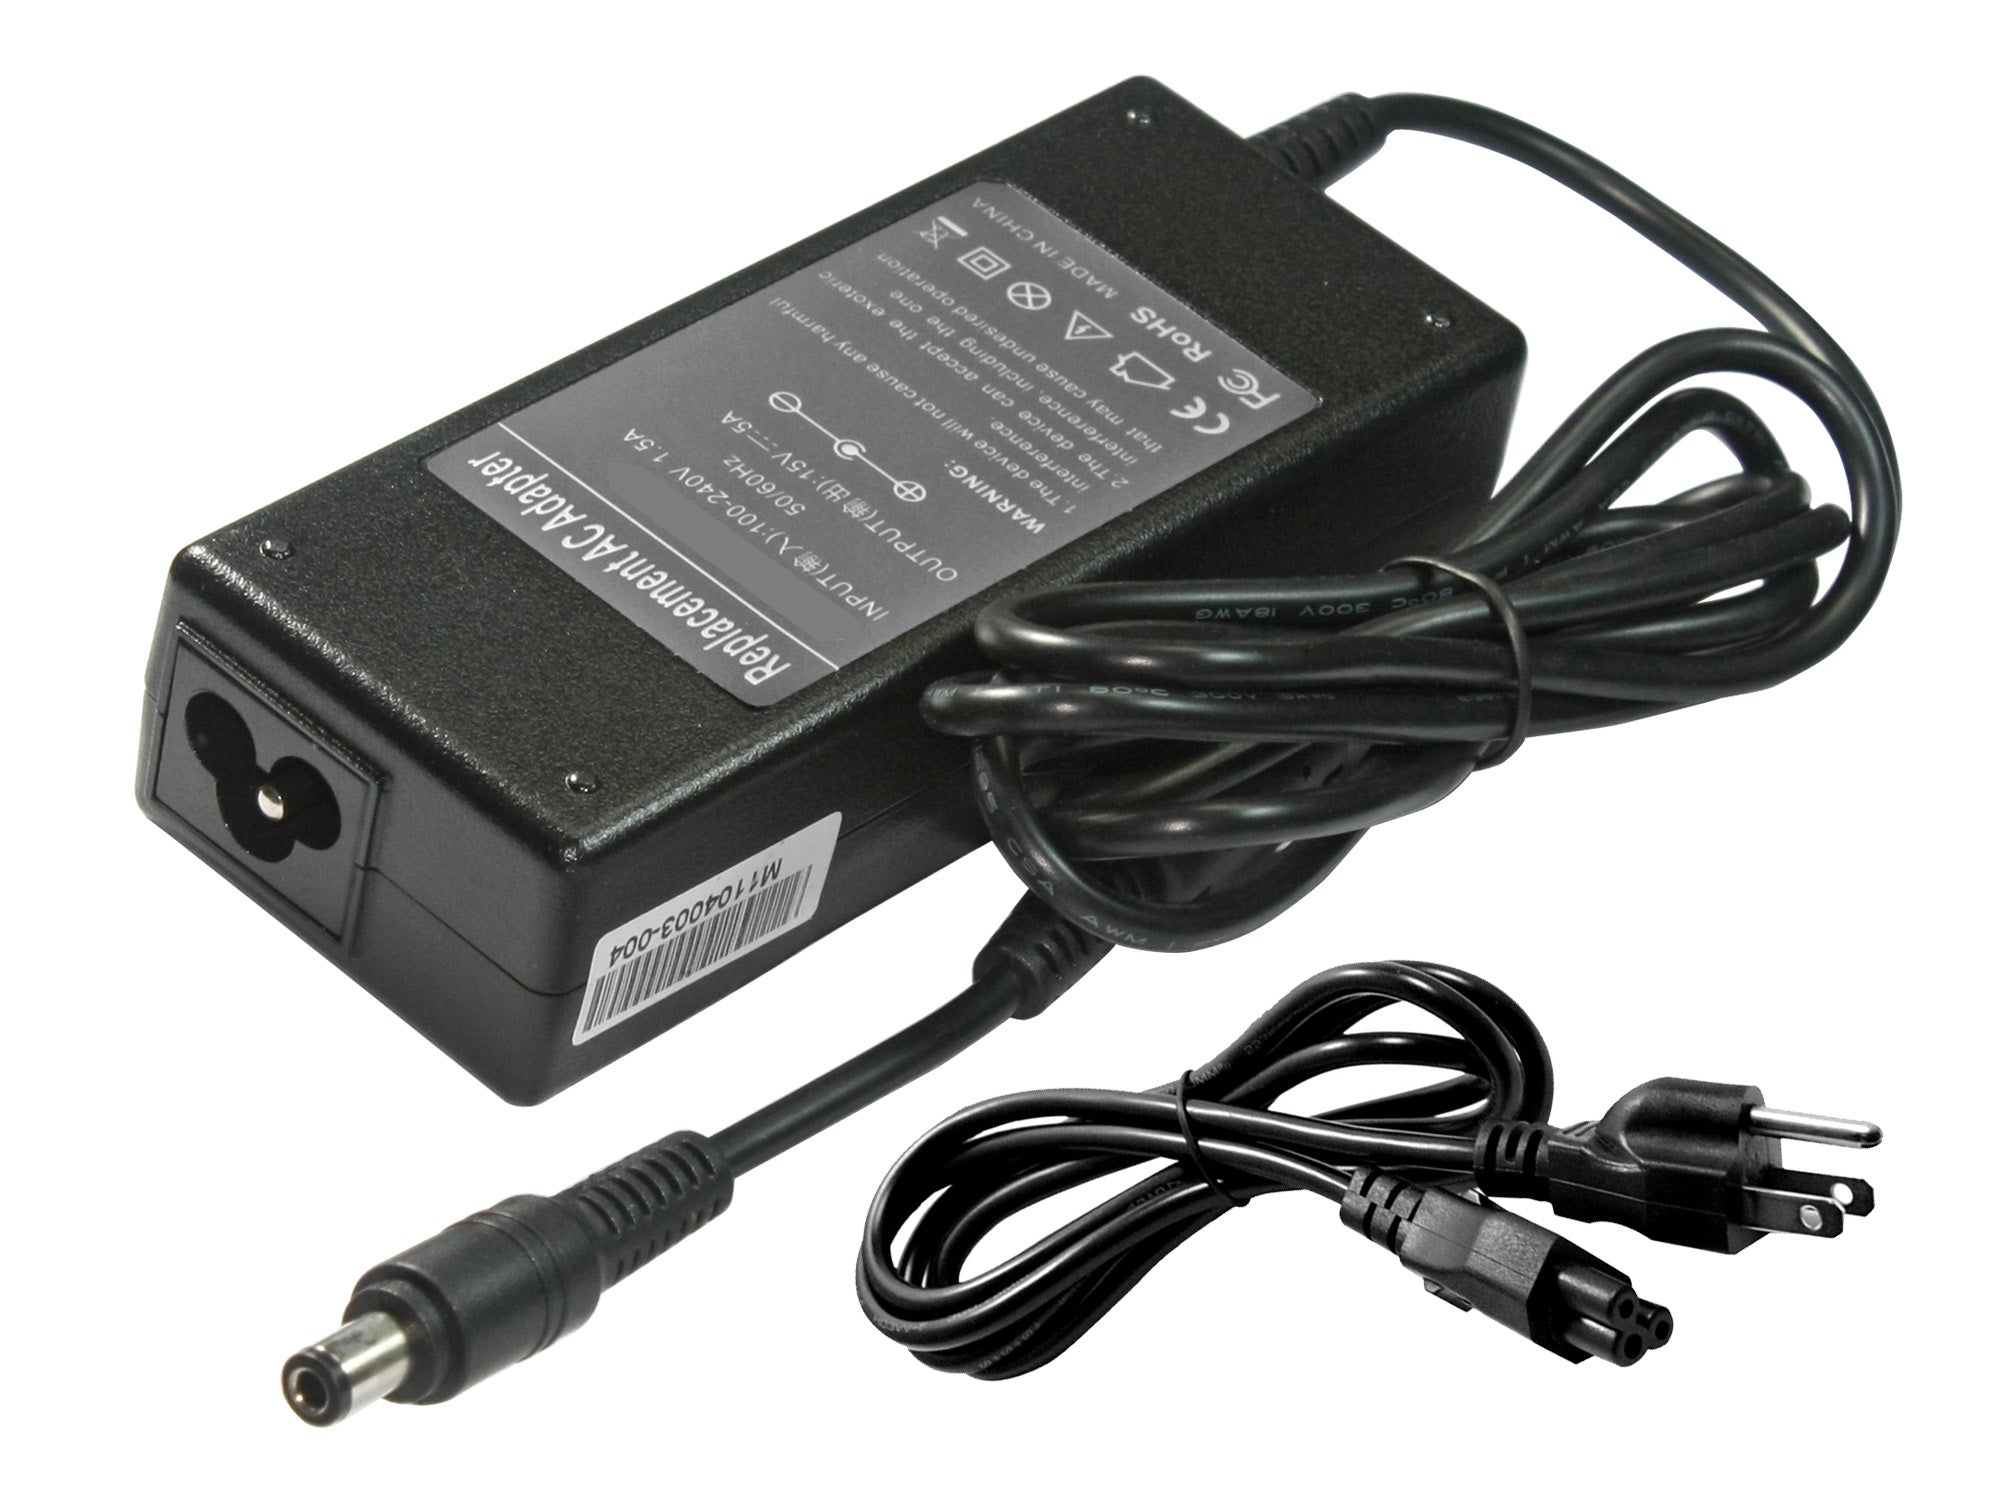 Compatible Replacement Toshiba Satellite A105-S4000 AC Adapter 75Watt 15V 5A.